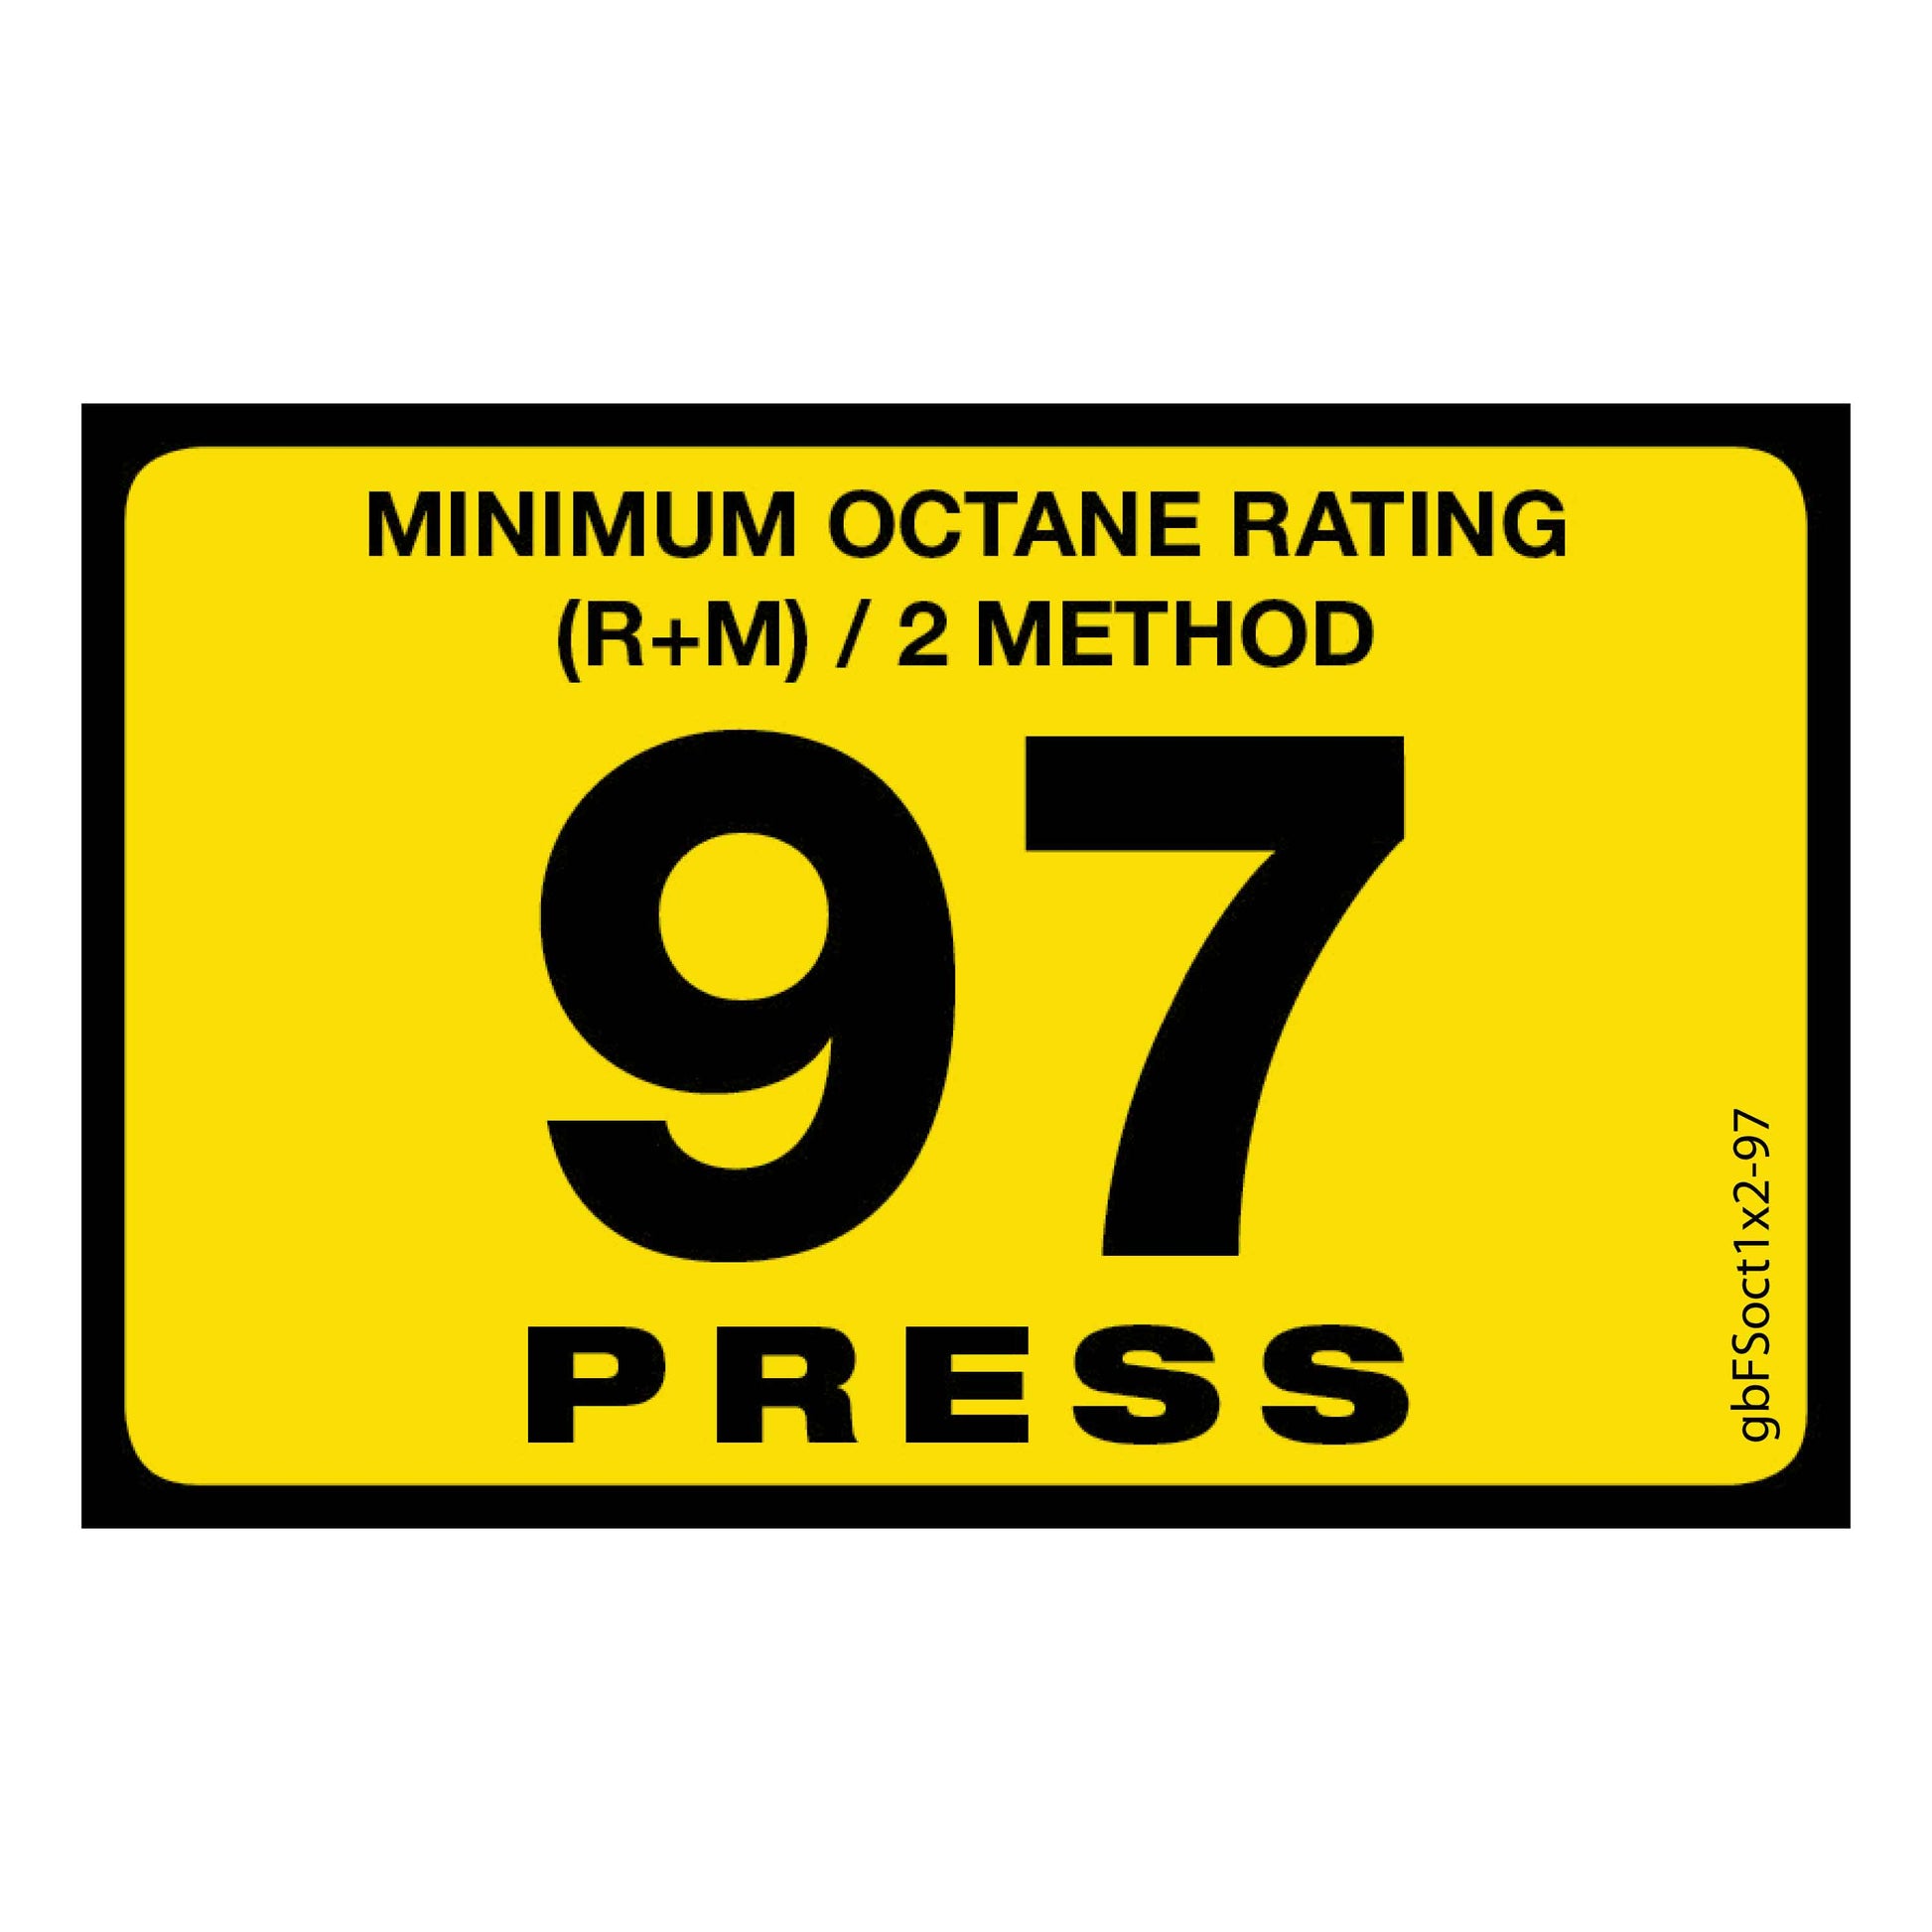 97 Press Octane Rating Decal. 1 inch by 2 inches in size. 